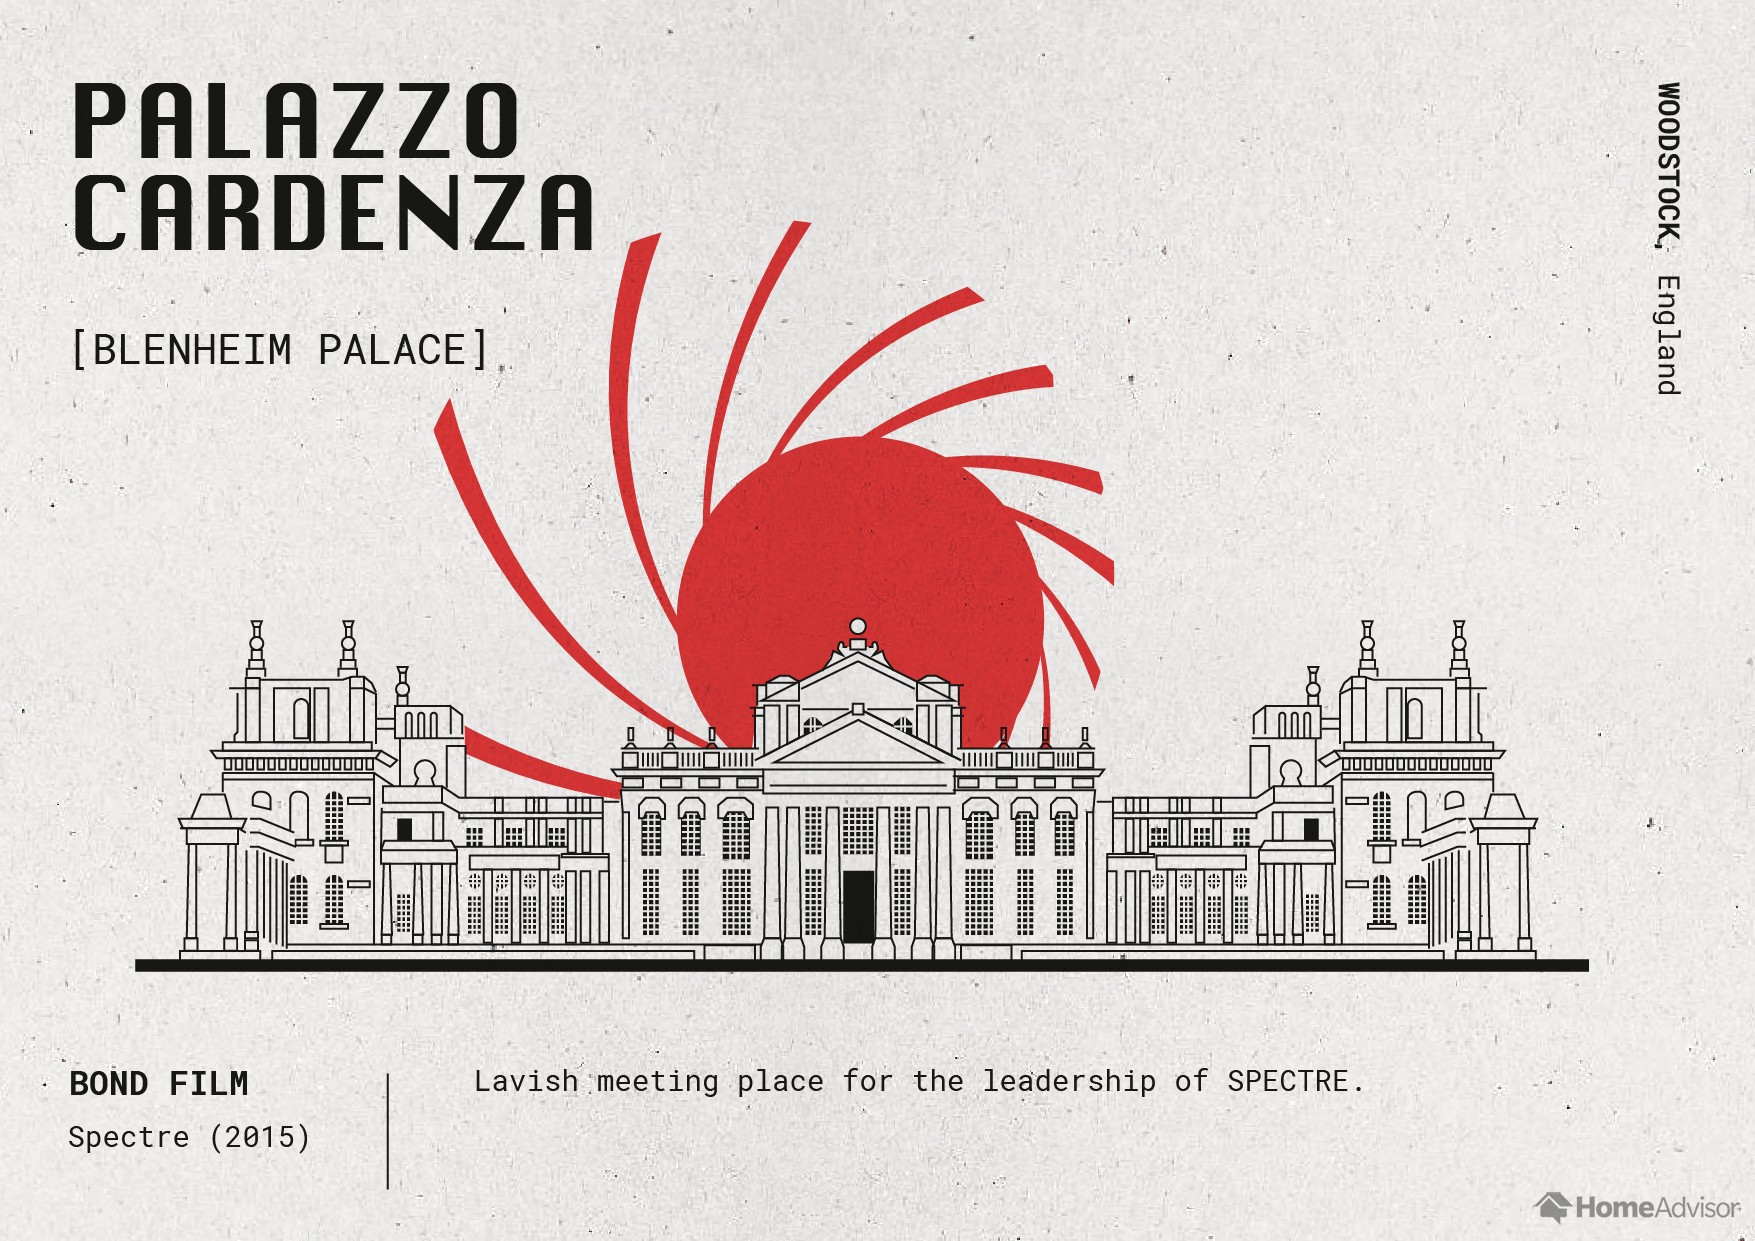 45_The-Architecture-of-James-Bond_Palazzo-Cardenza.png